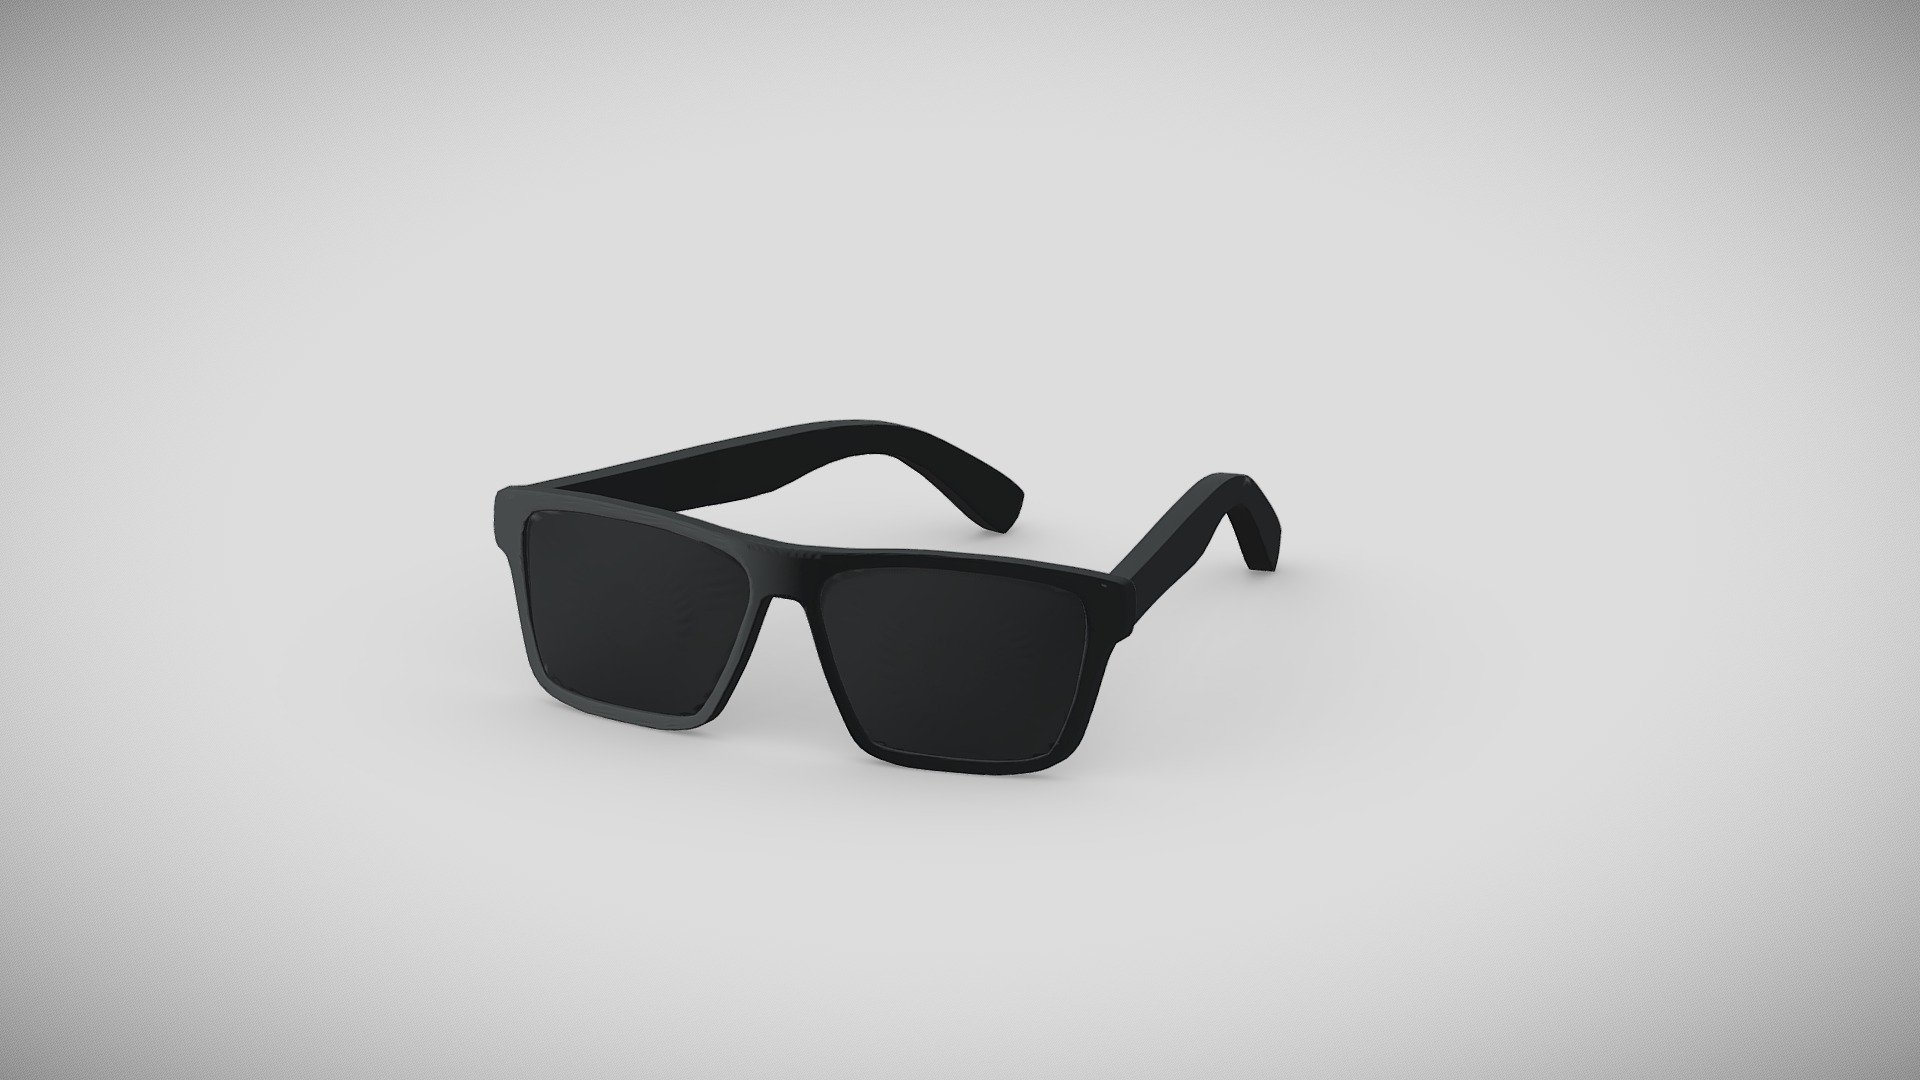 Protect your eyes with this simple sunglass. Plastic and glass was the material used into this model 3d model